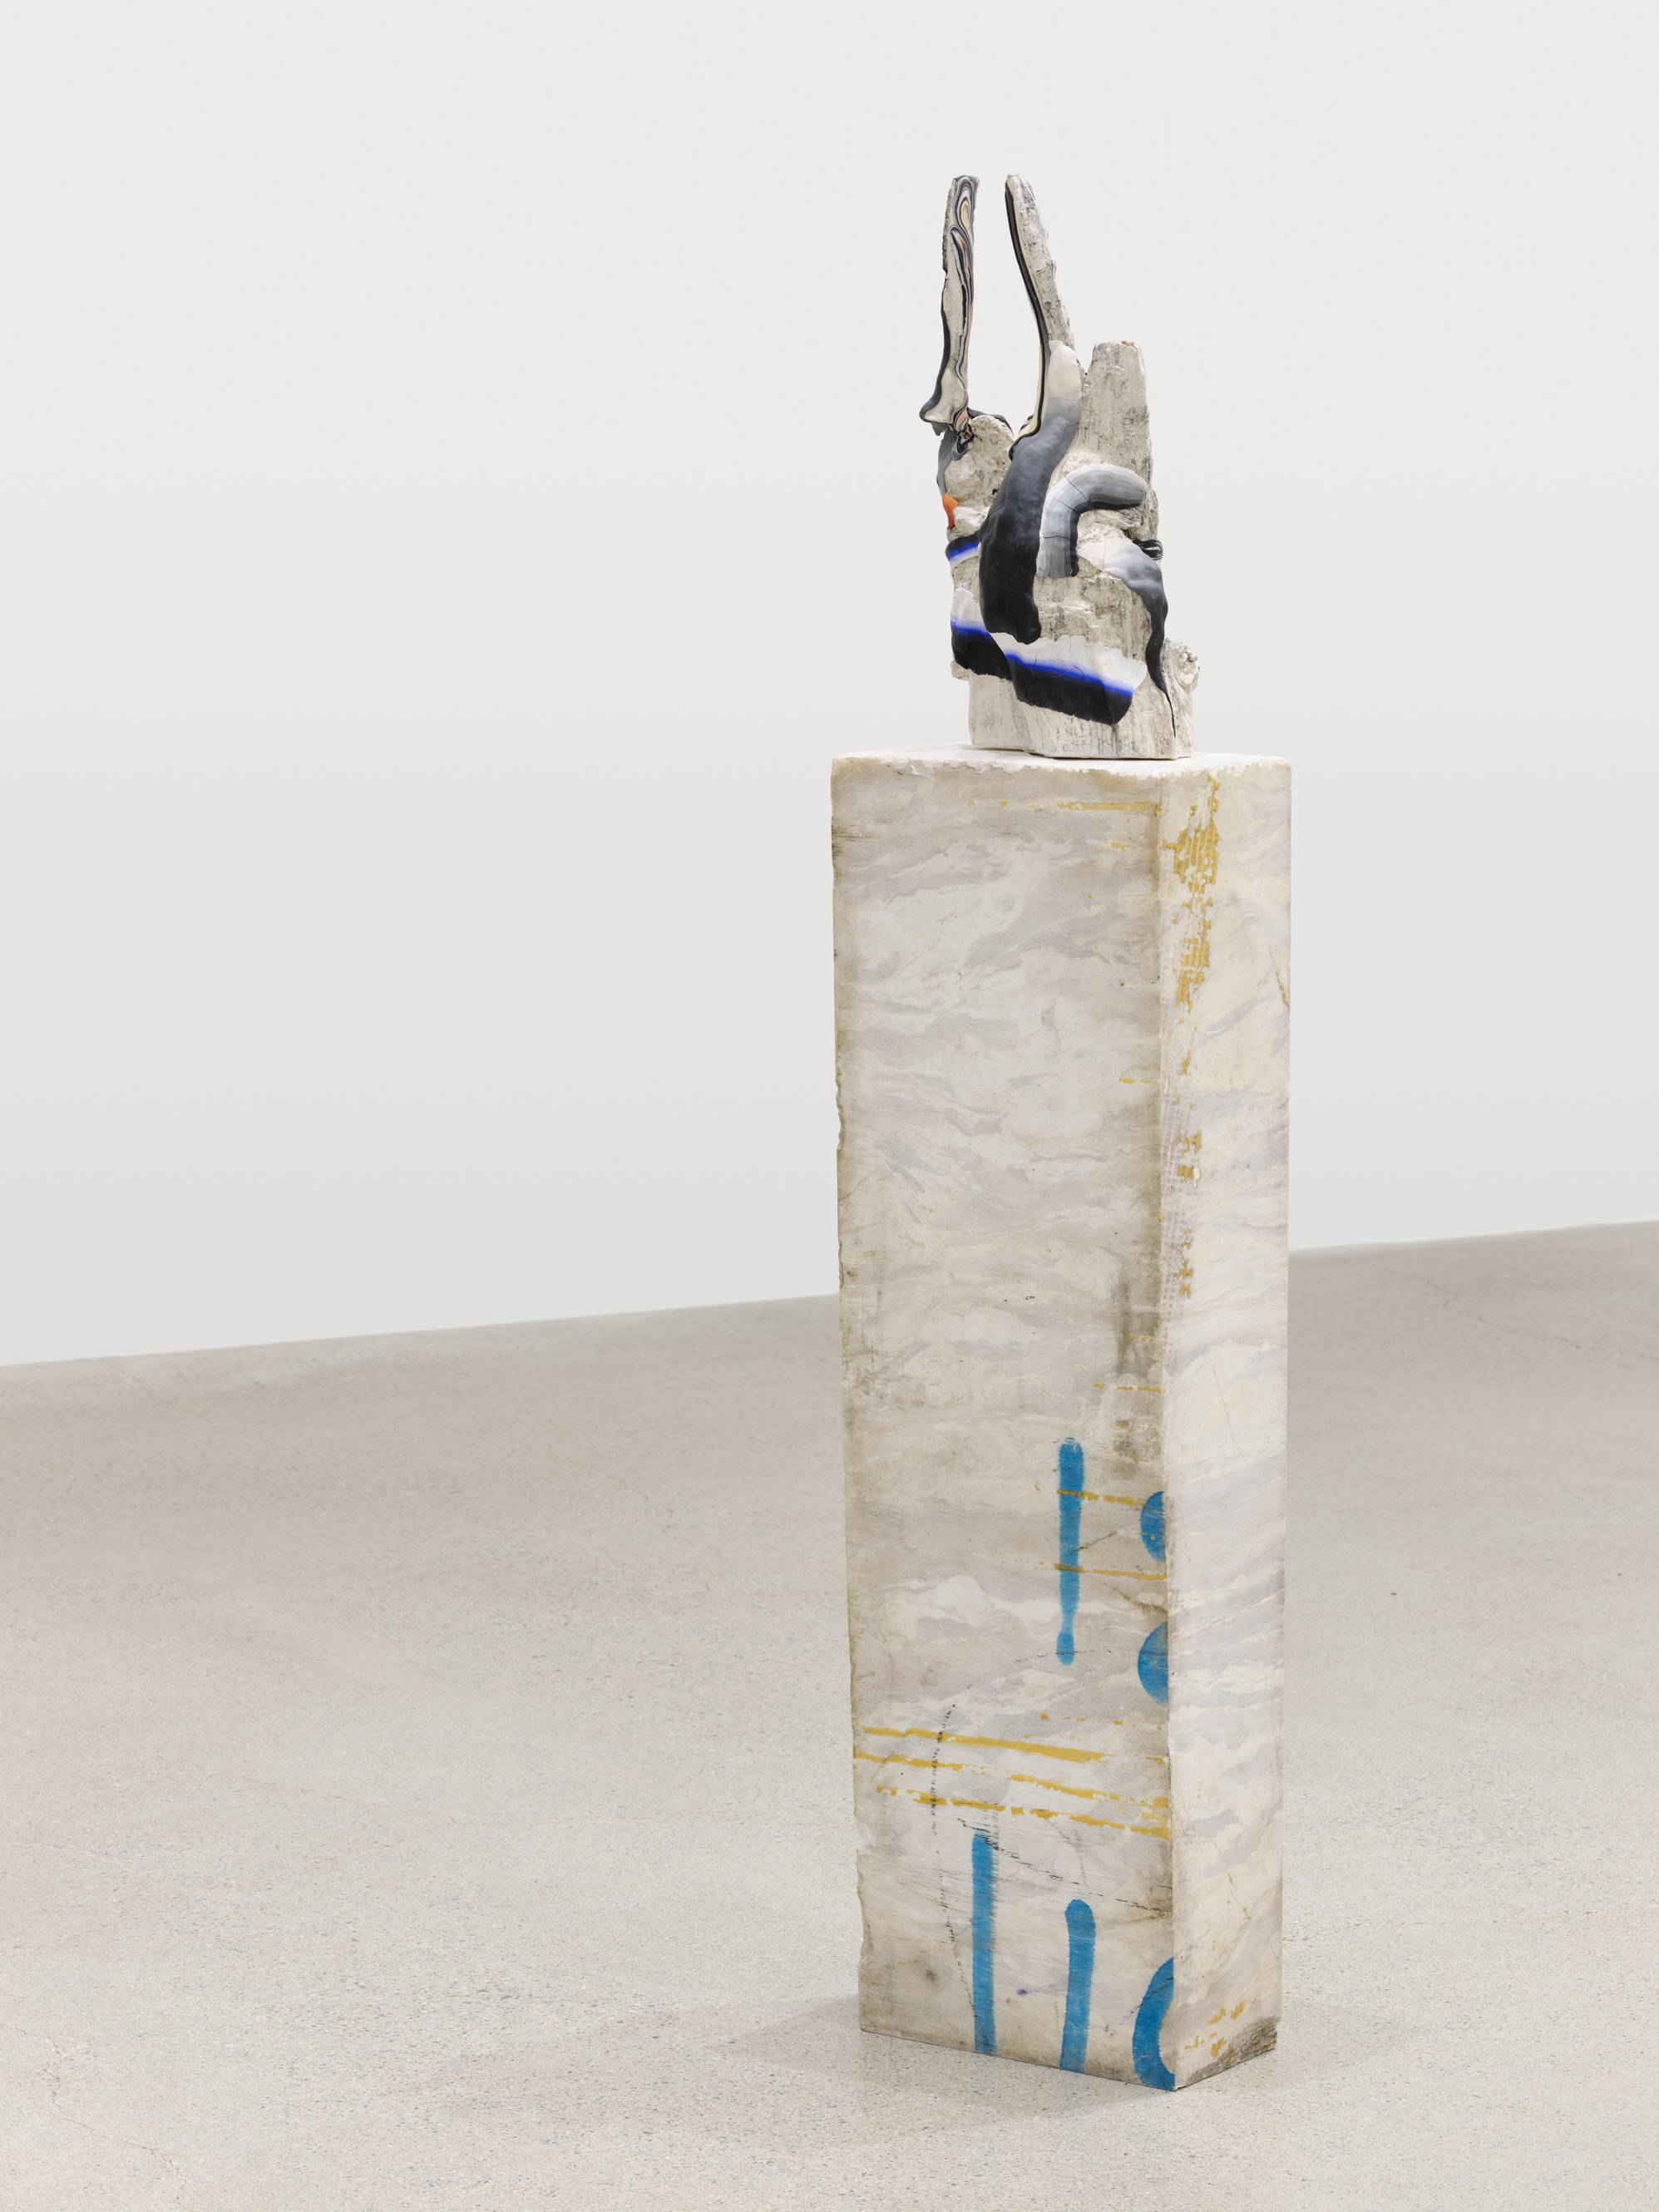 ​Valérie Blass, Le doigt dans l’œil, 2021, polymer clay, ultracal, marble, 49 1/2 x 10 x 7 in. (126 x 26 x 18 cm) by 